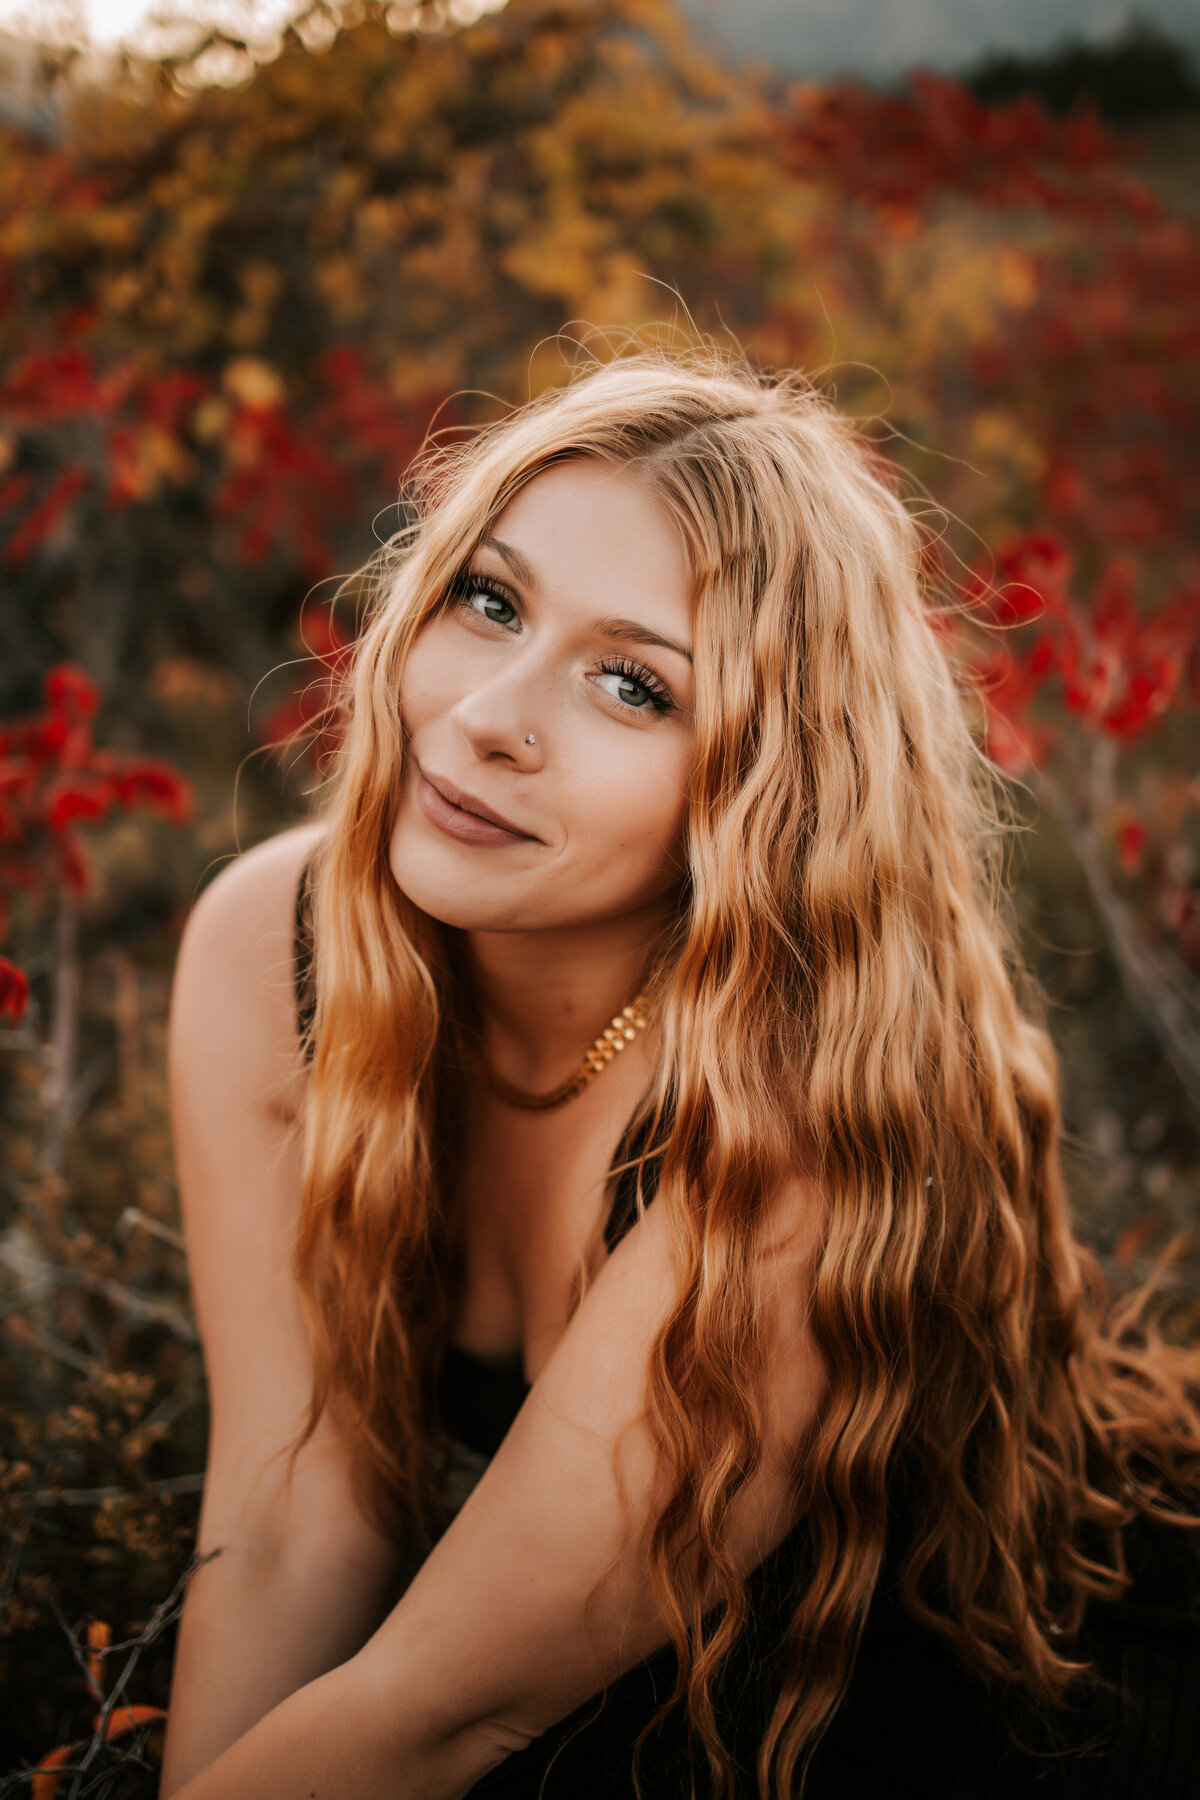 high school senior photo of girl with long wavy hair and fall foliage in the background